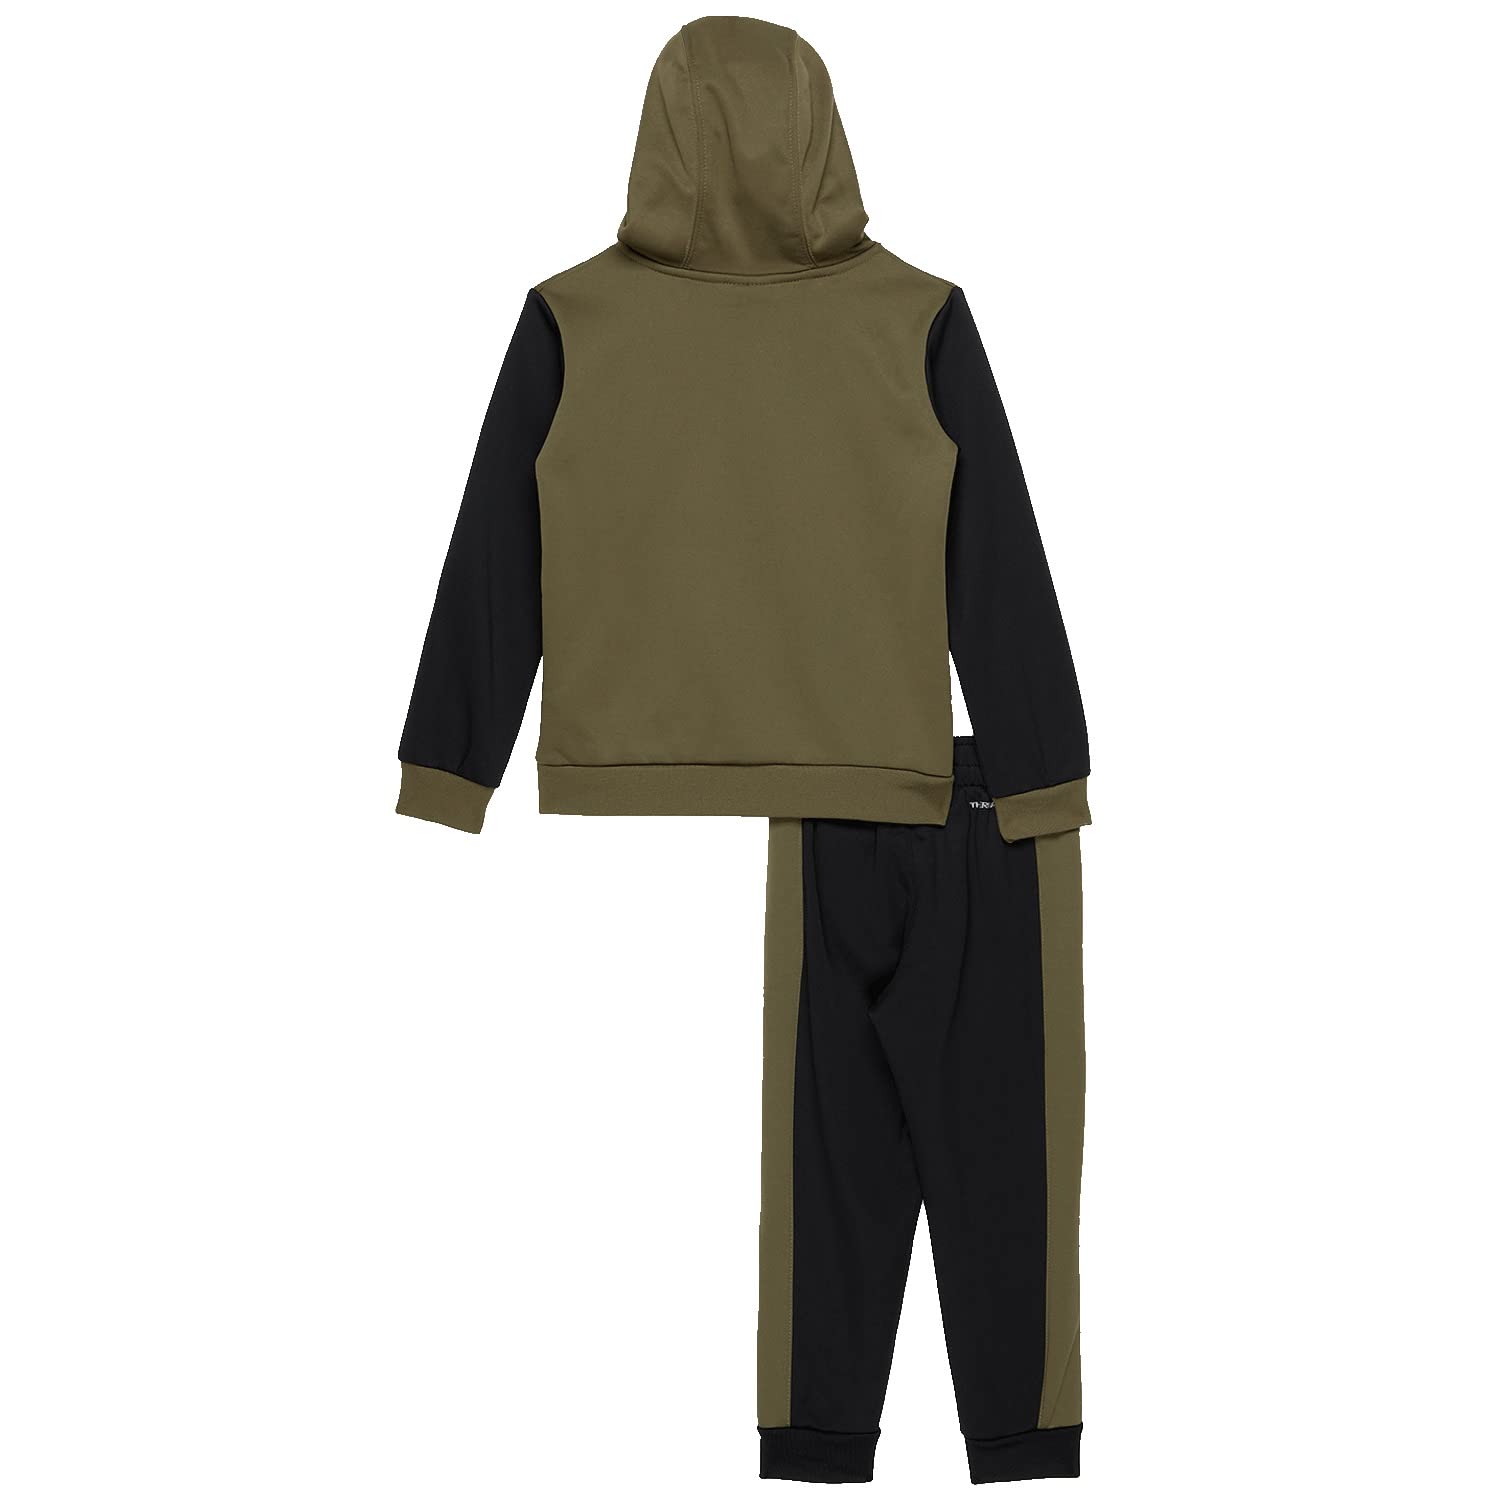 Image 2 of Therma Fit Adp Set (Toddler)